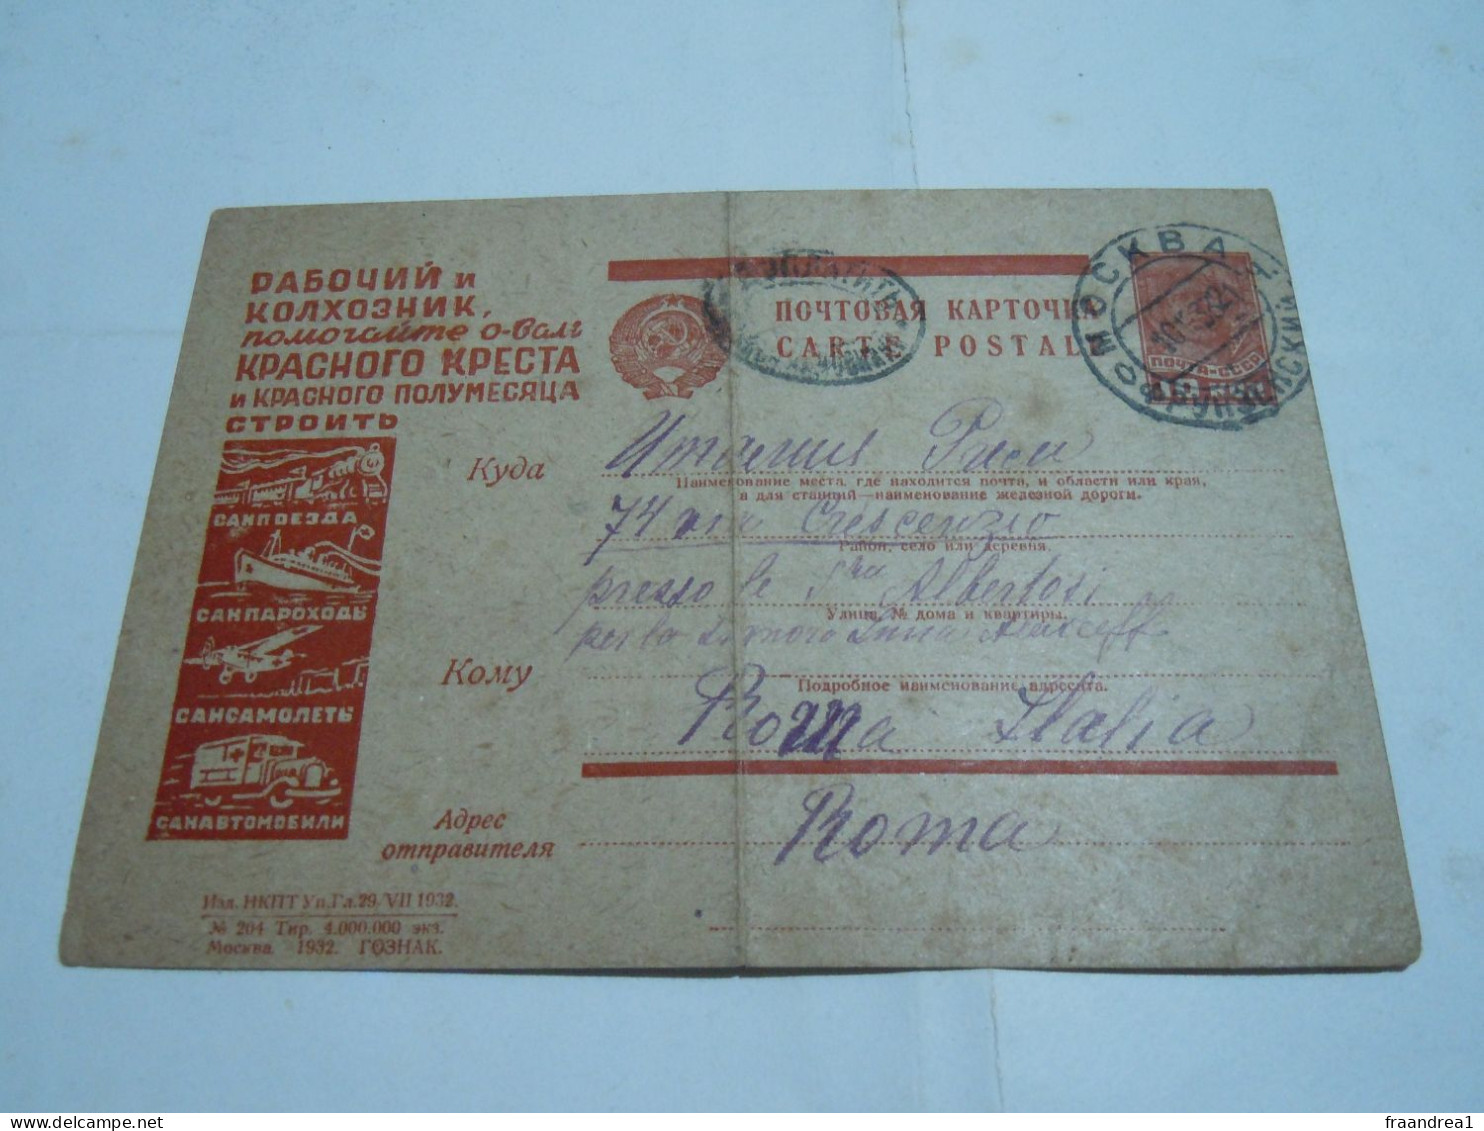 Russia USSR Postal Stationery Postcard Cover 1933  TO ROMA  ITALY N 1 - Lettres & Documents